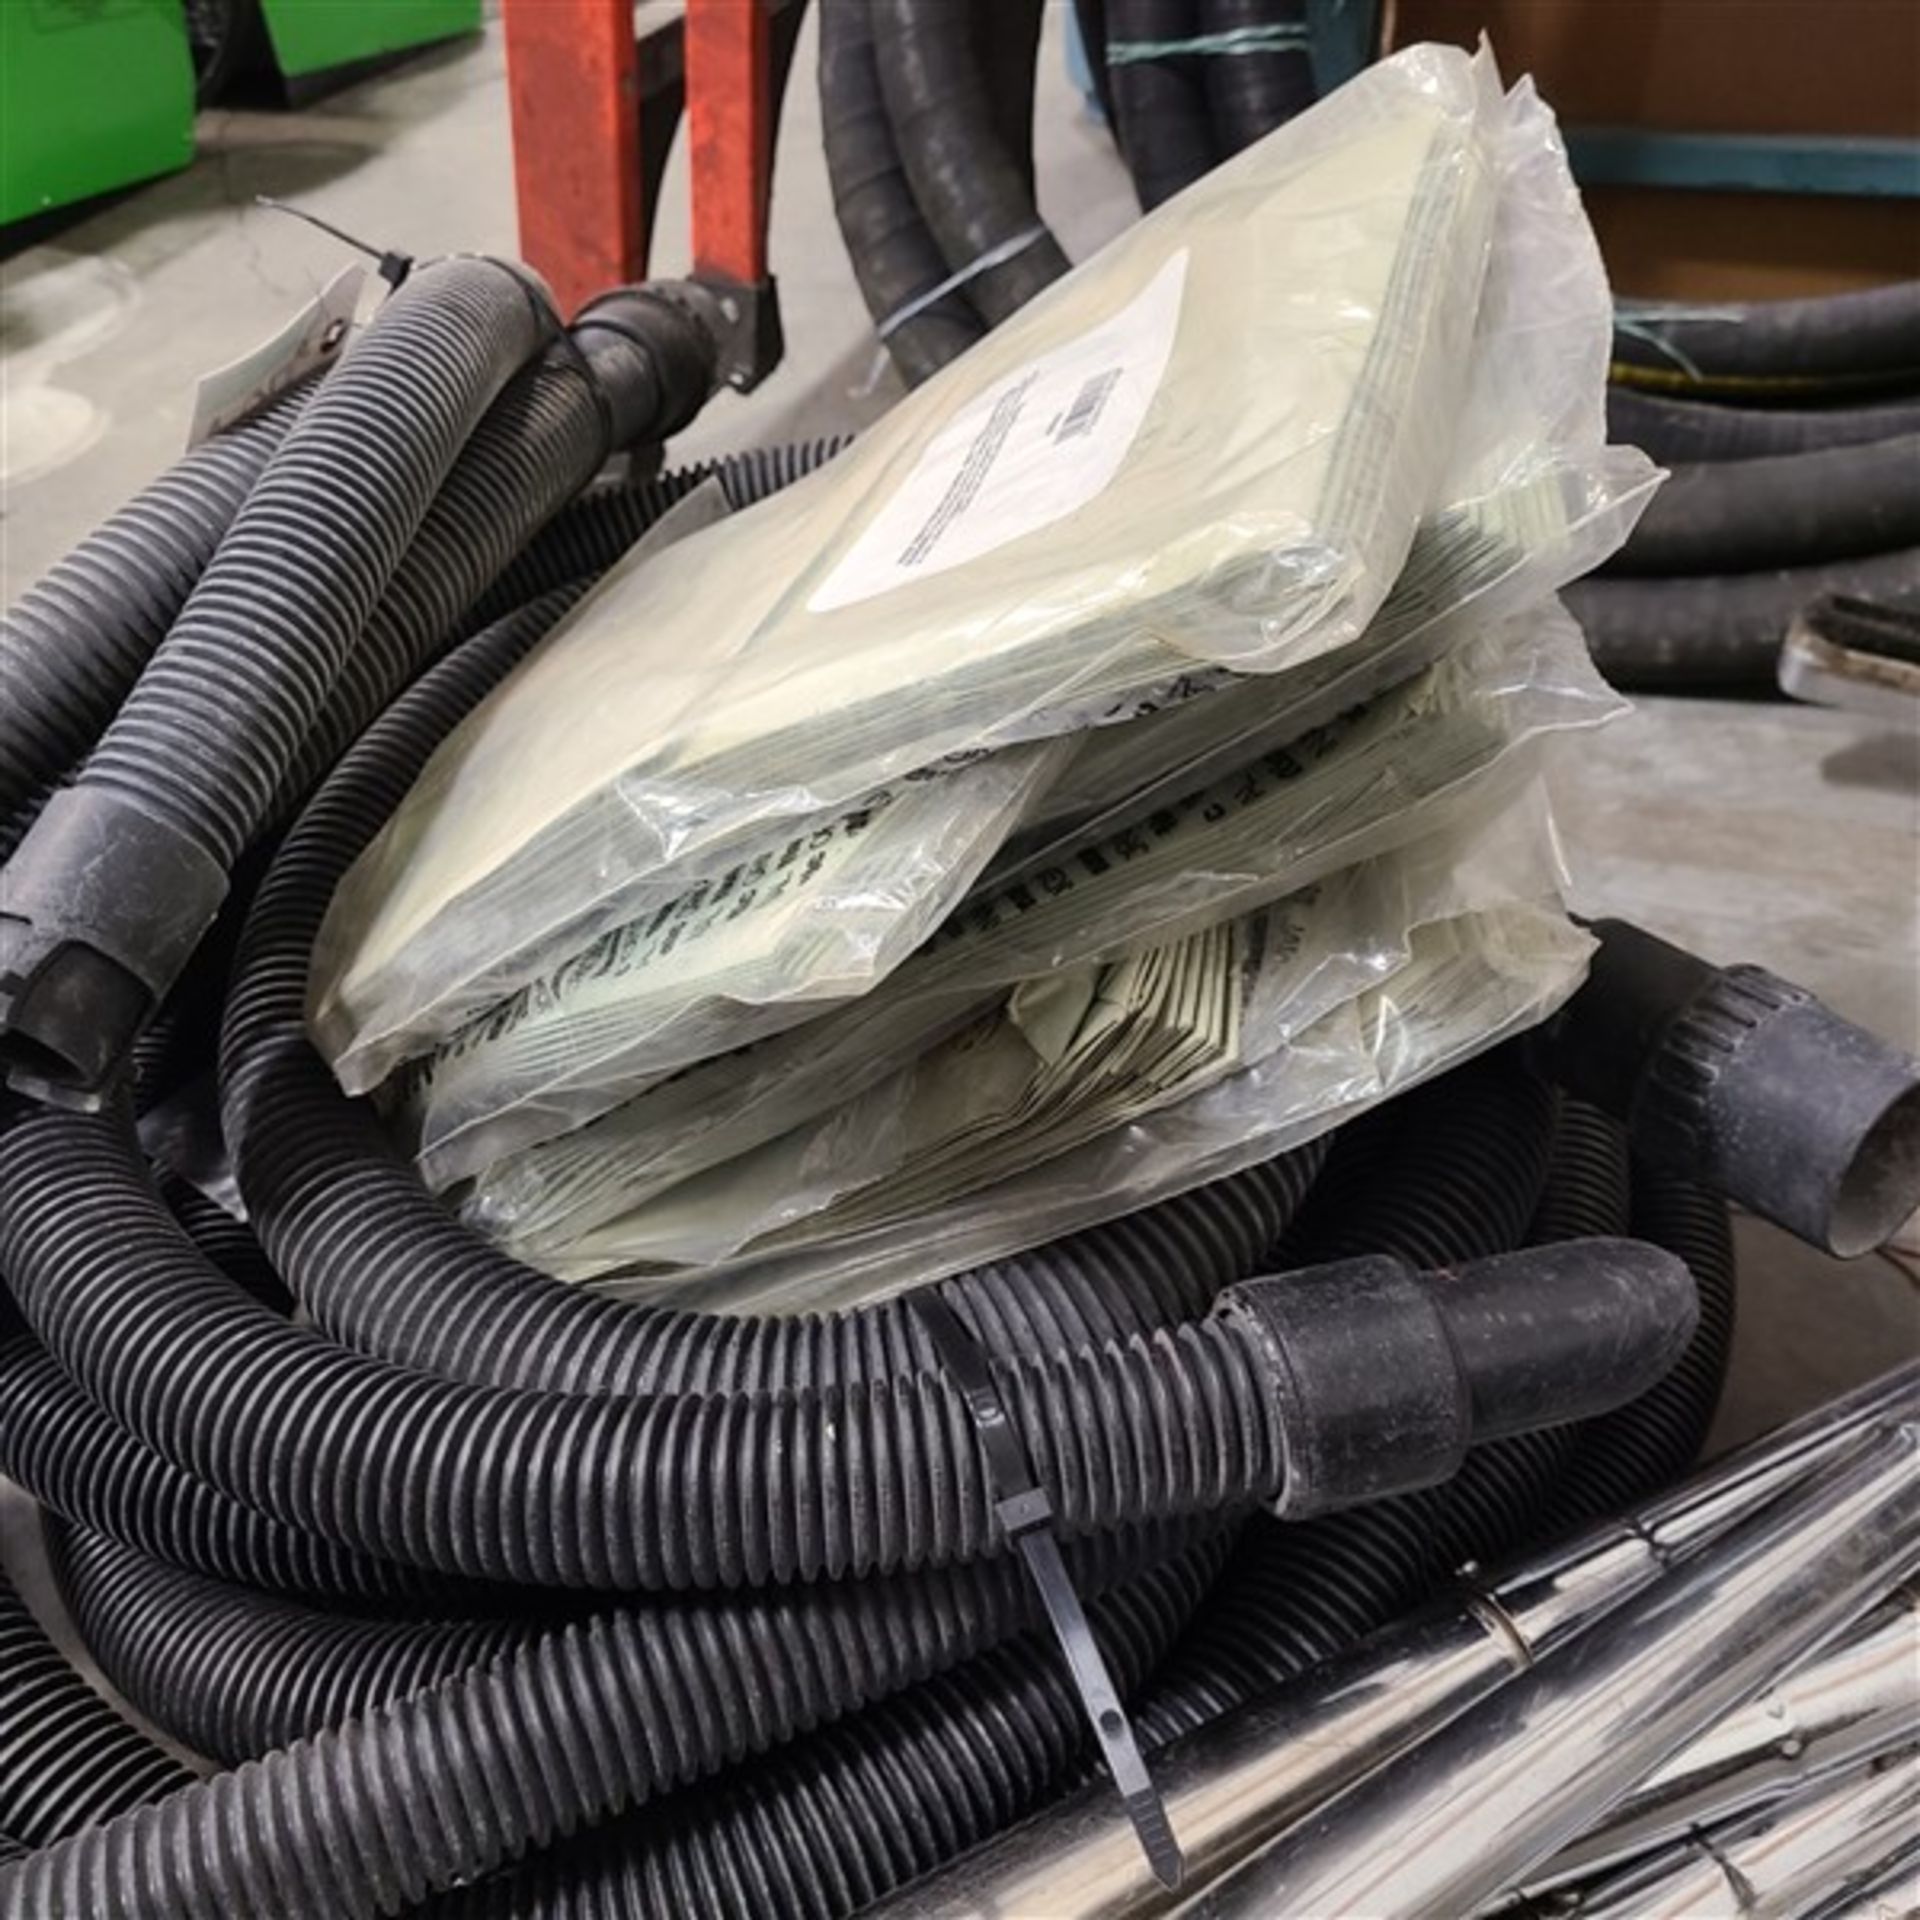 LOT OF VACUUM CLEANER HOSE, WANDS AND BAGS - Image 3 of 4